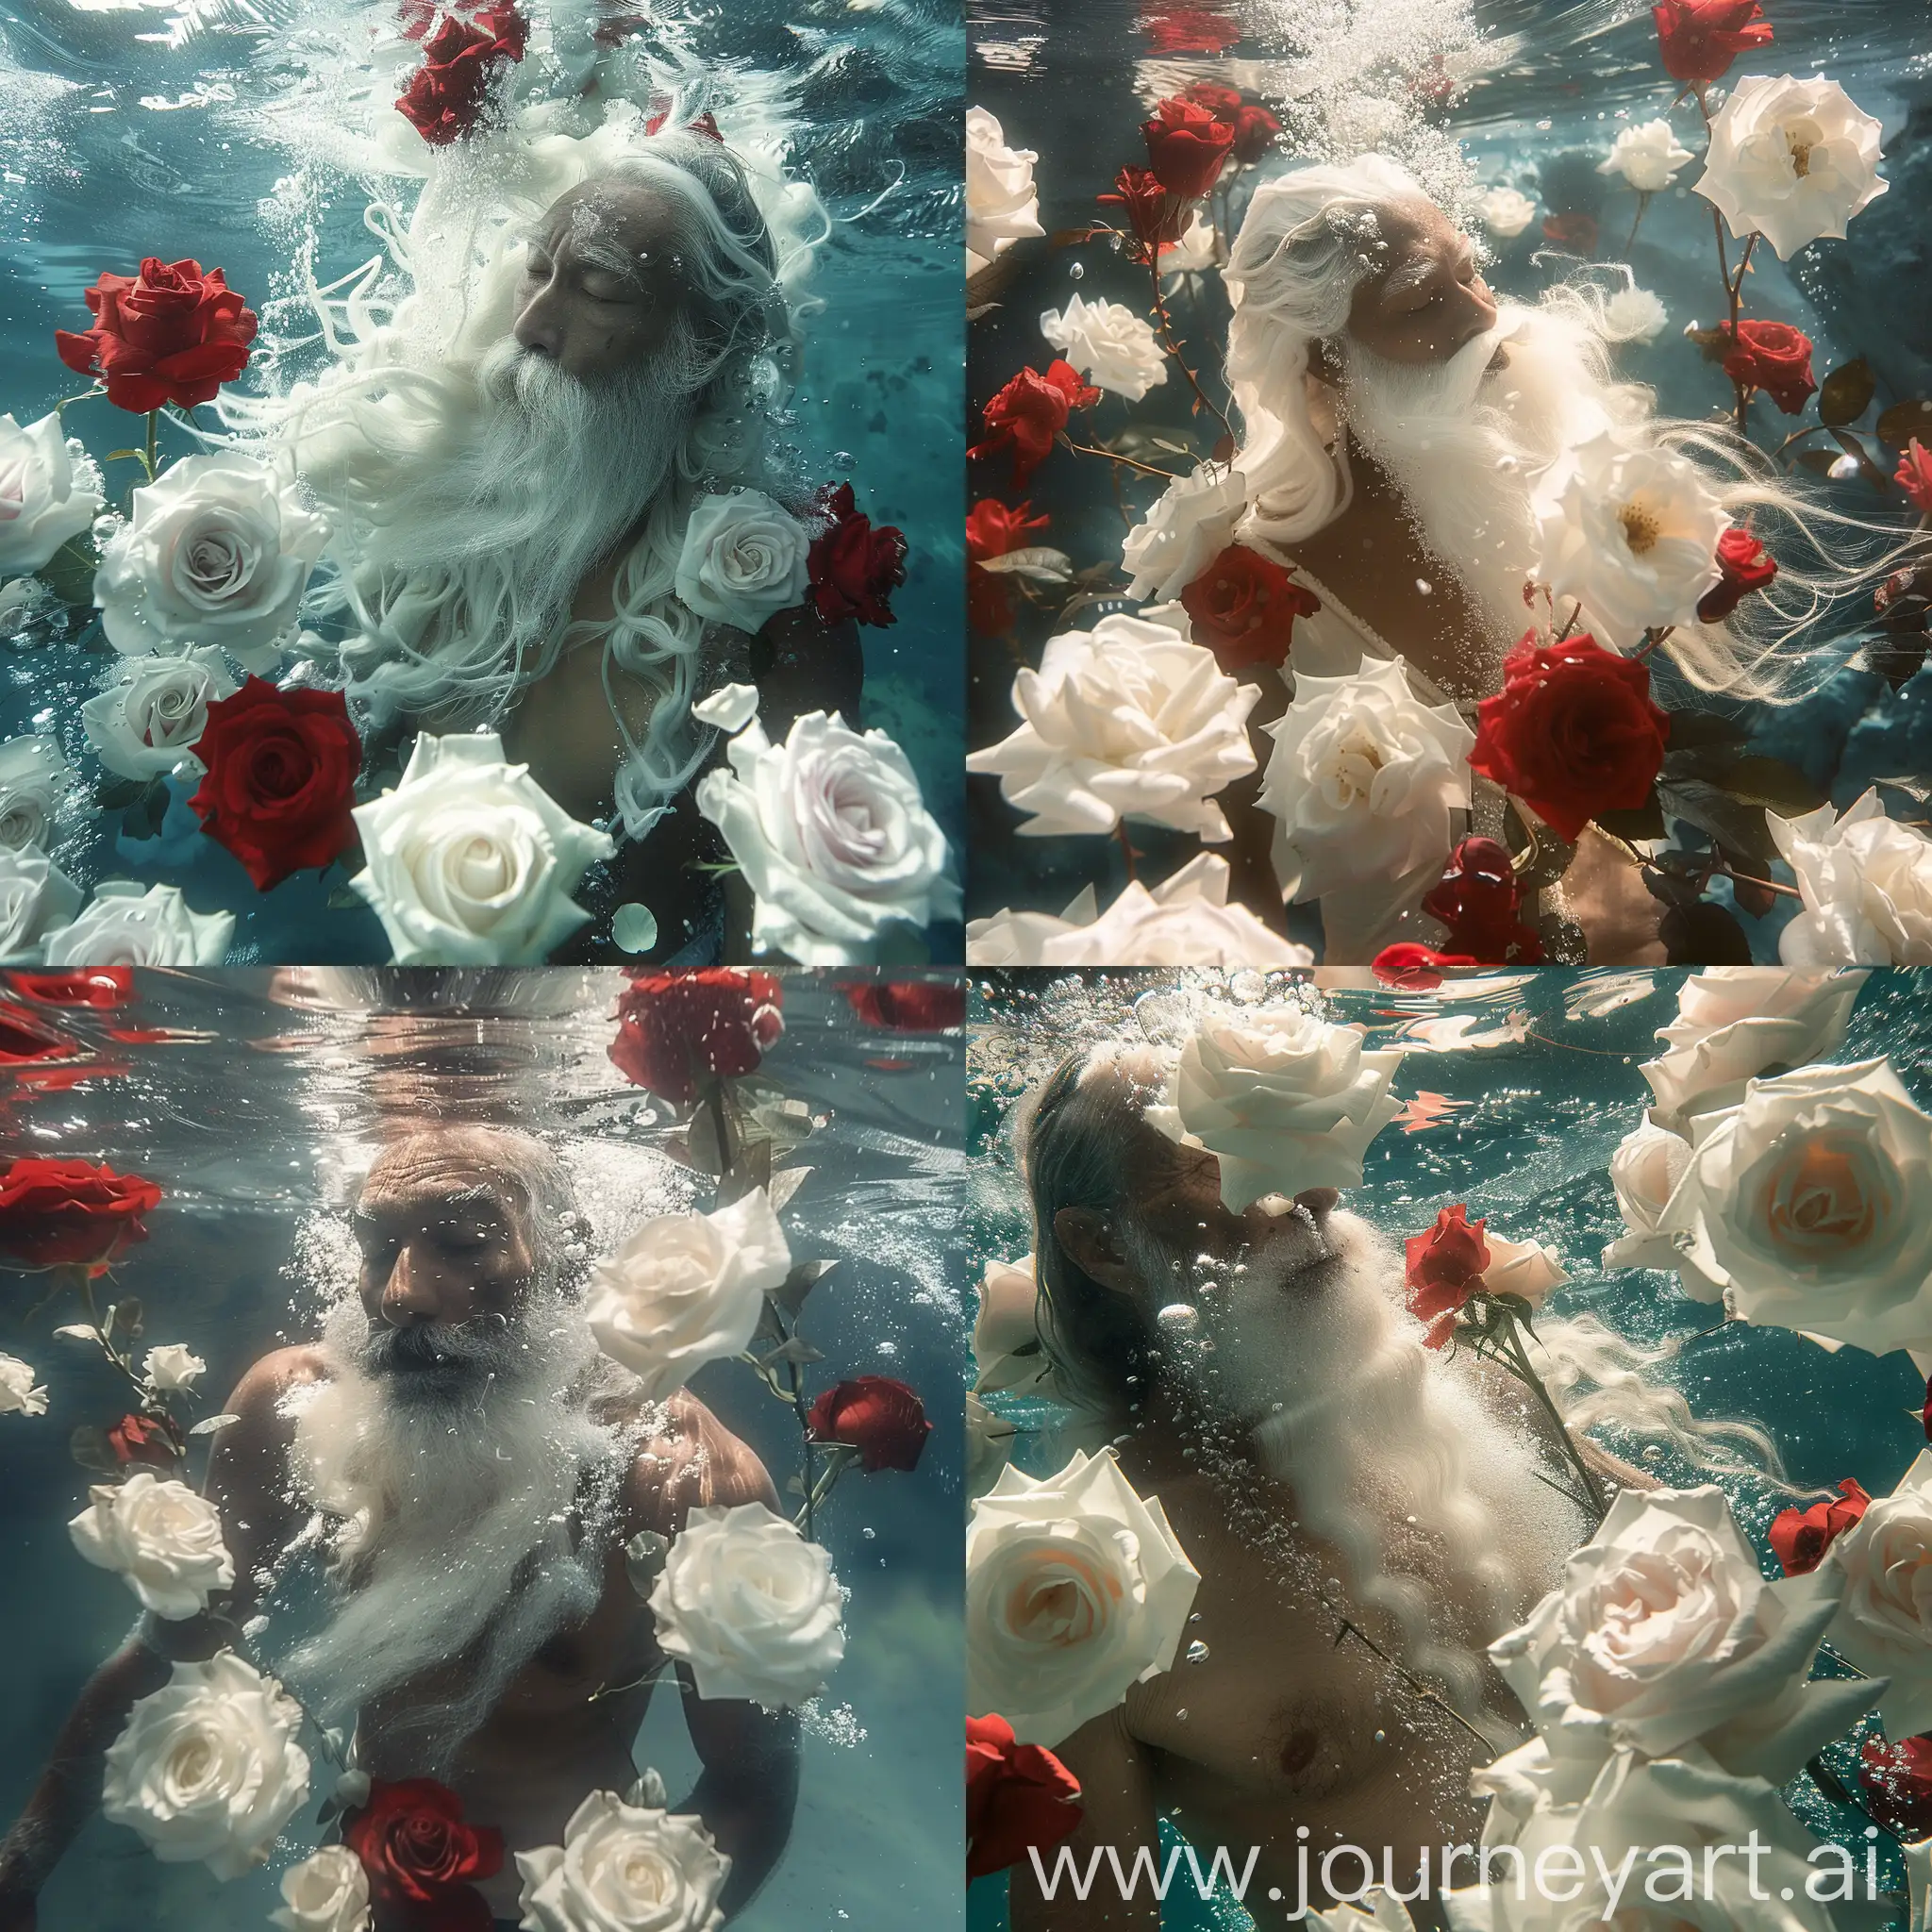 A captivating image of a man with long white beard underwater, white roses and red roses around him underwater.